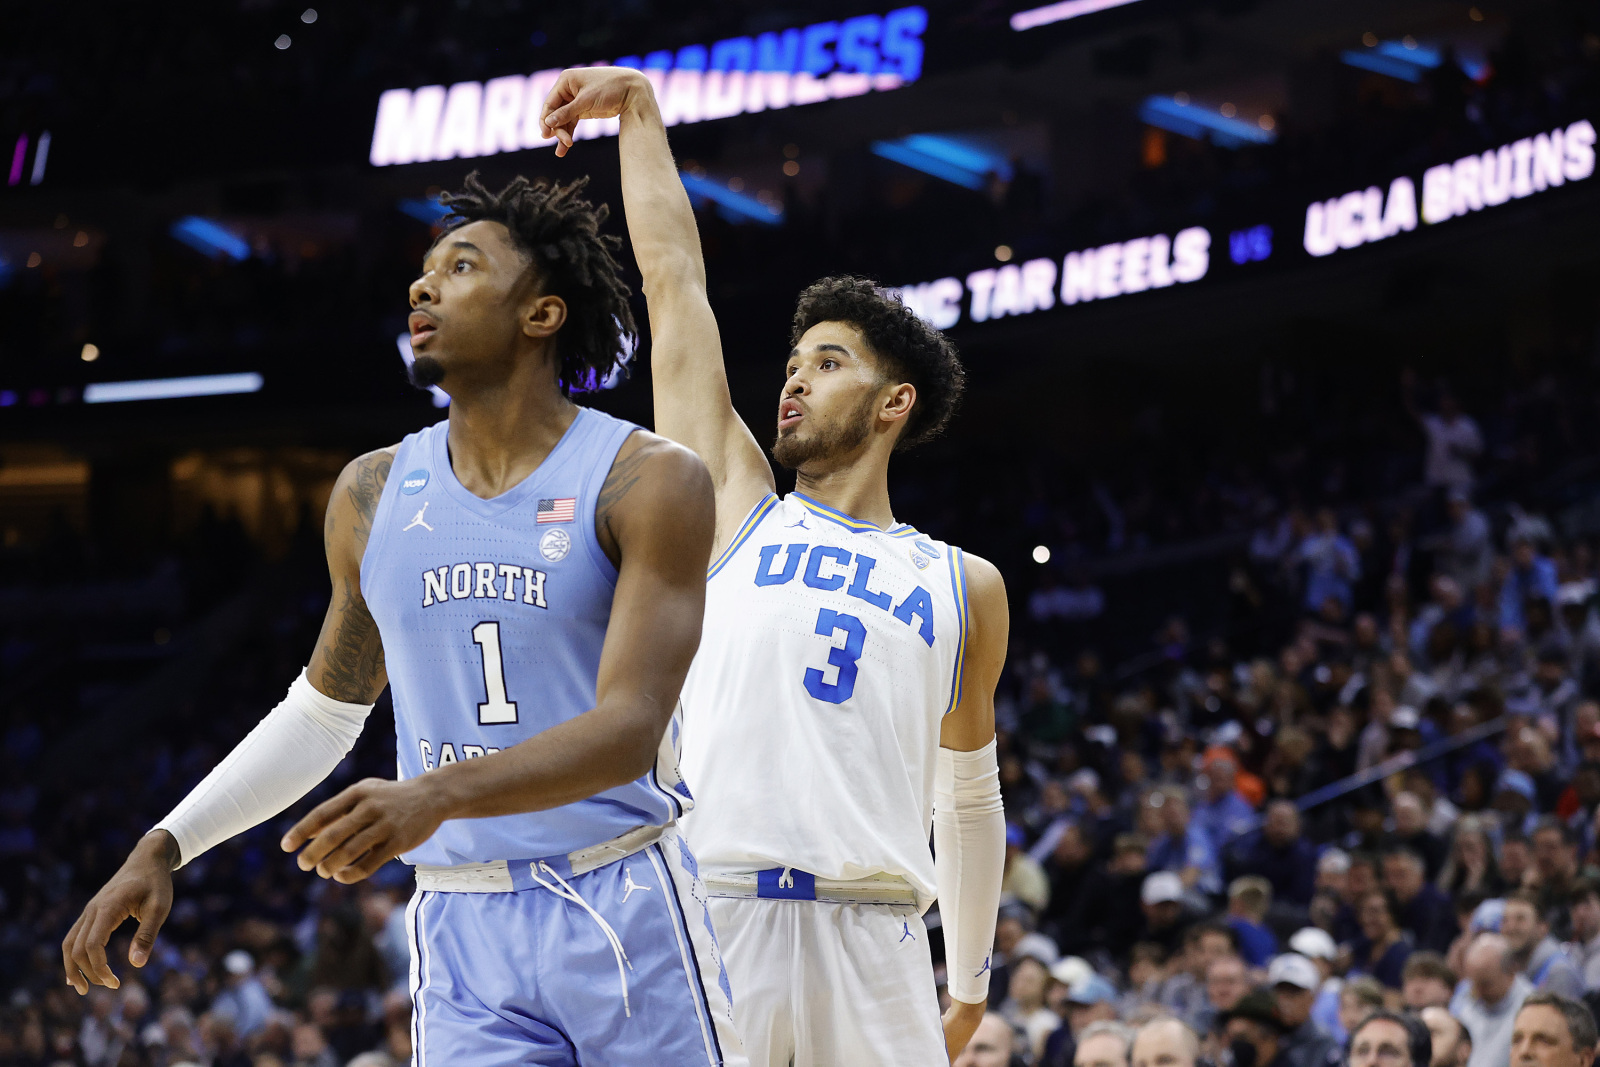 Johnny Juzang debuts as UCLA routs San Diego for fourth win in a